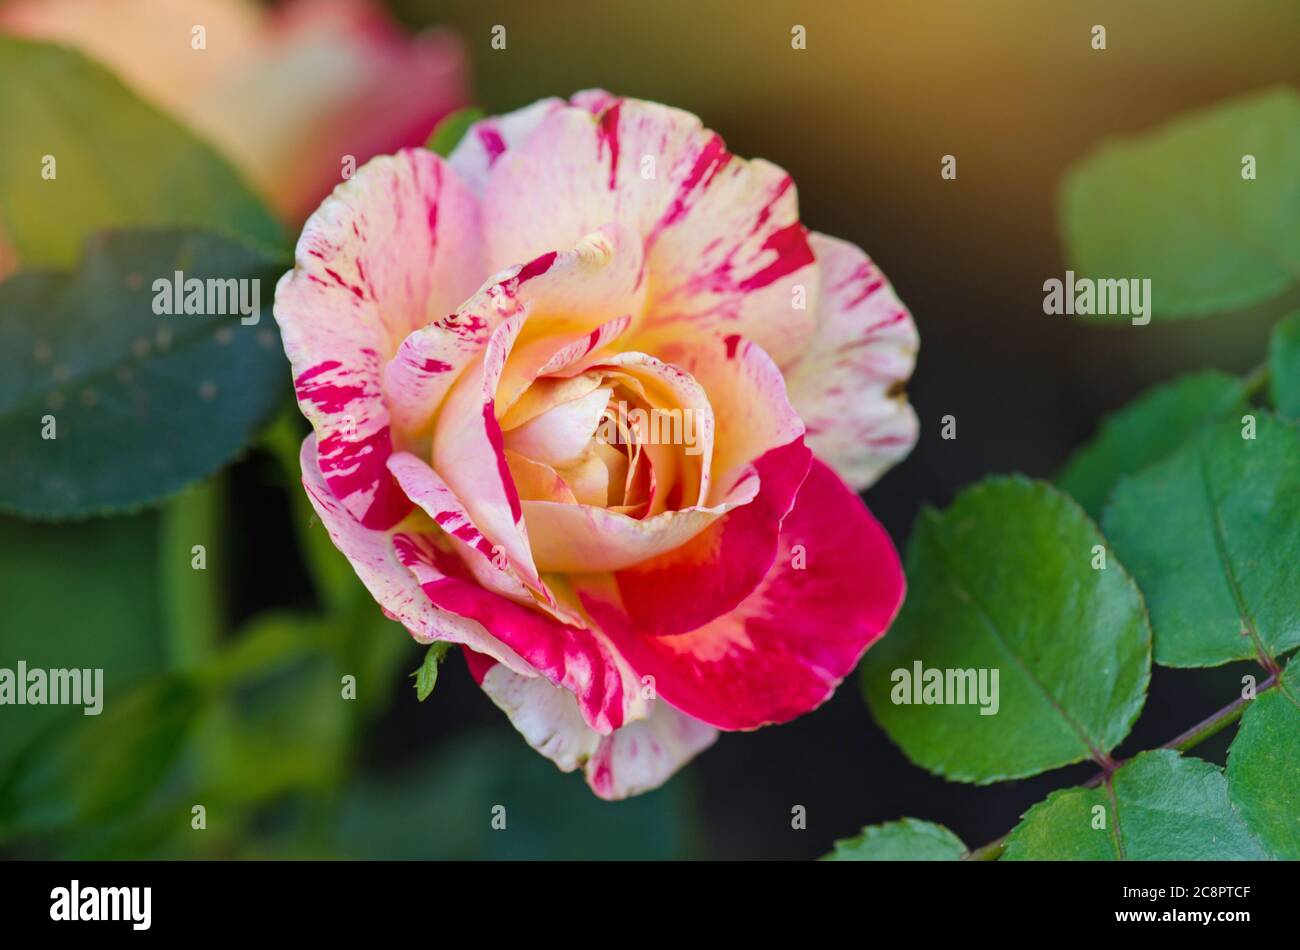 Claude Monet roses. Striped yellow and red roses known as Claud Monet roses. Stock Photo